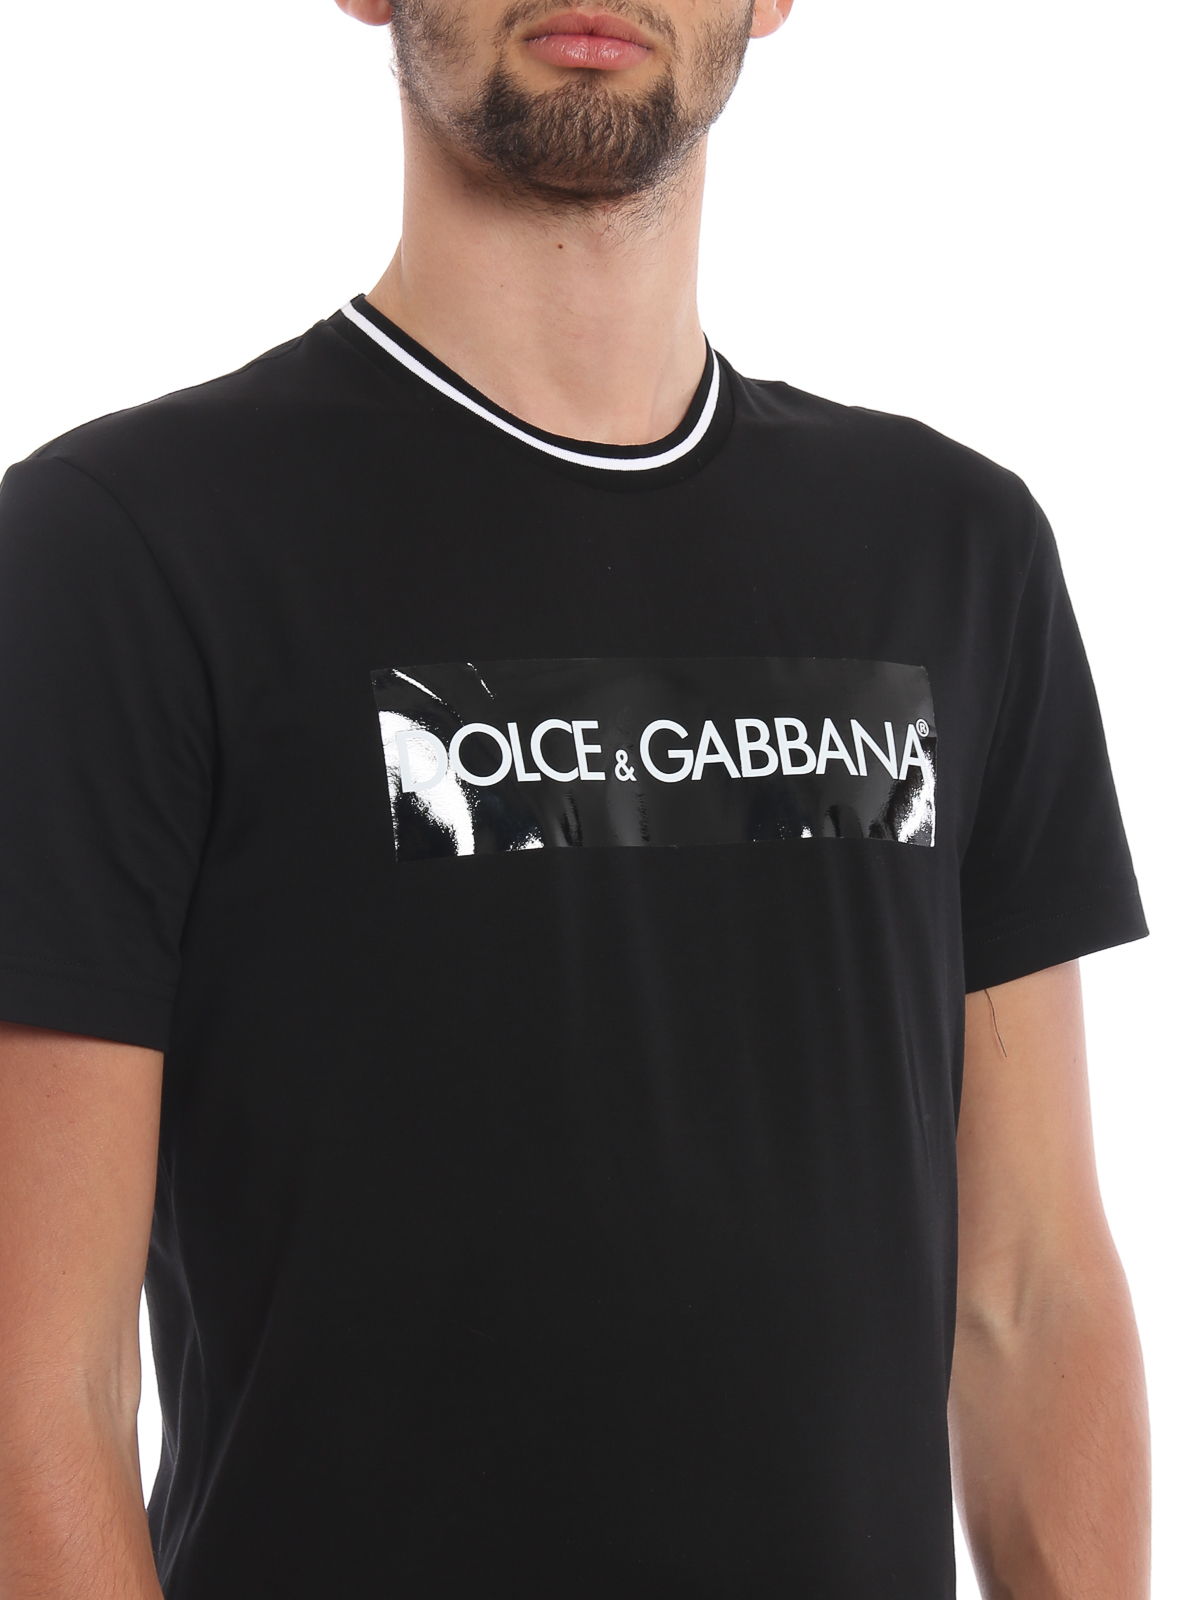 dolce and gabbana t shirts online